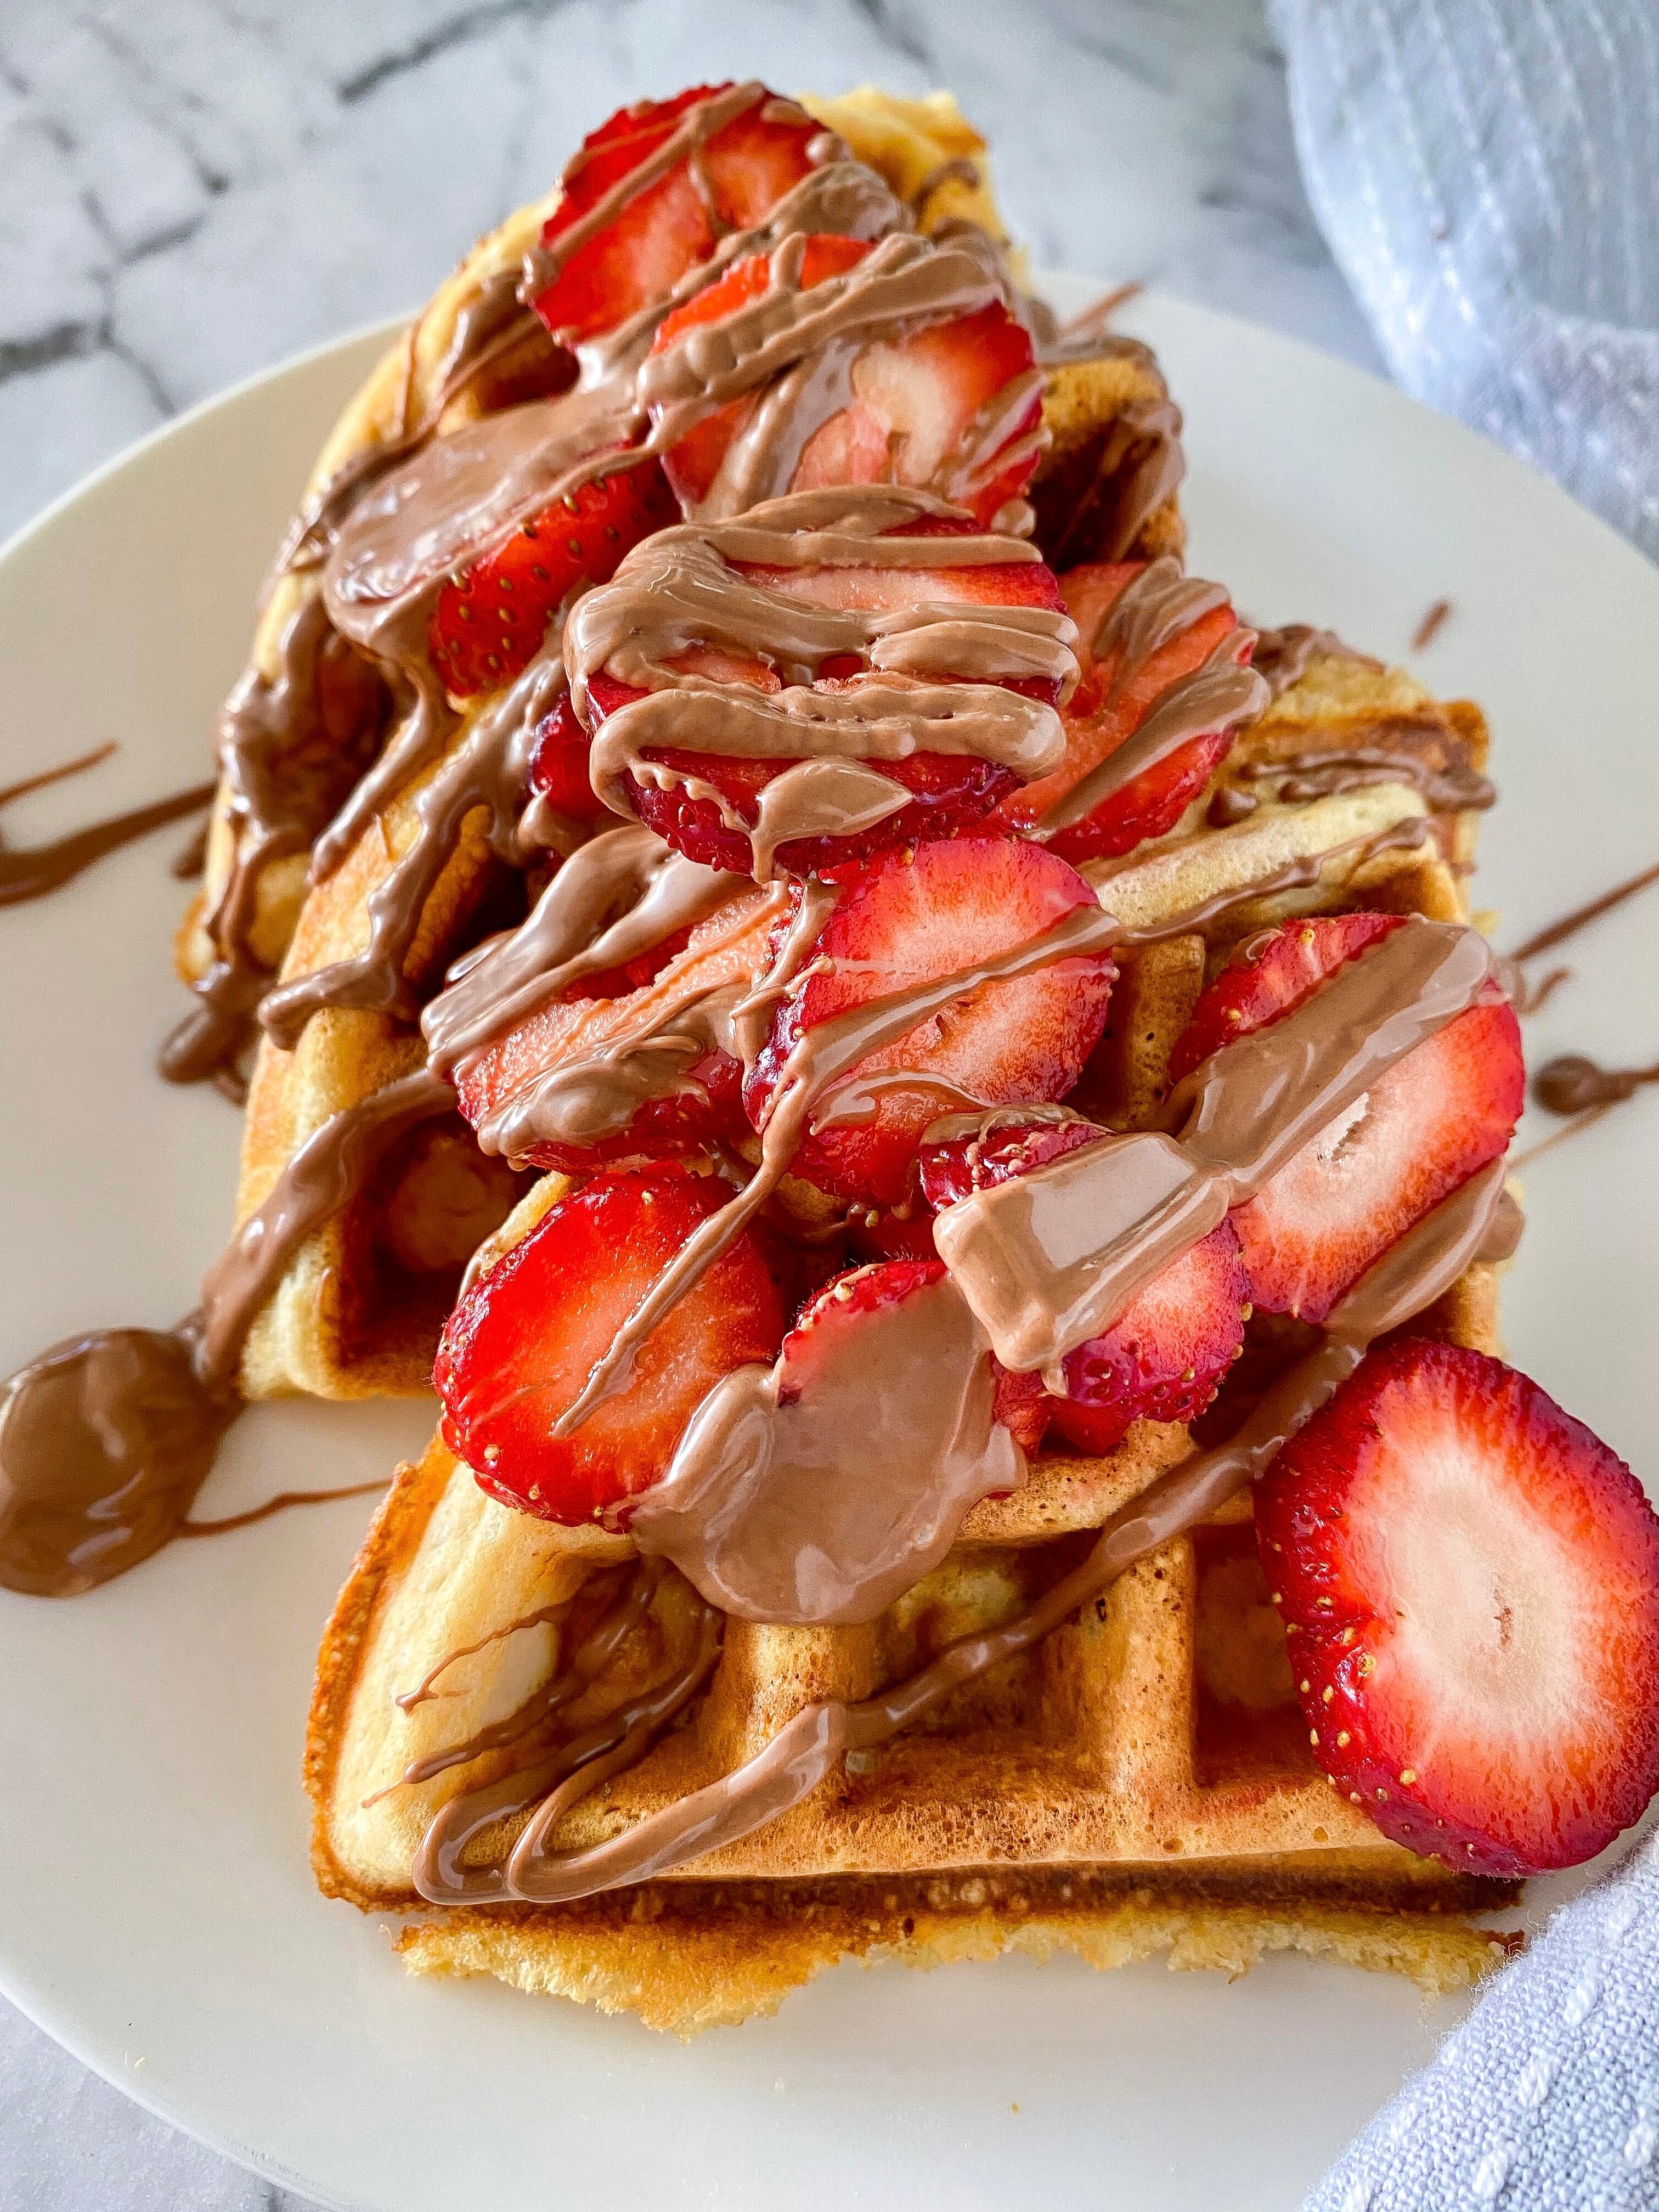 Keto Waffle With Chocolate and strawberries